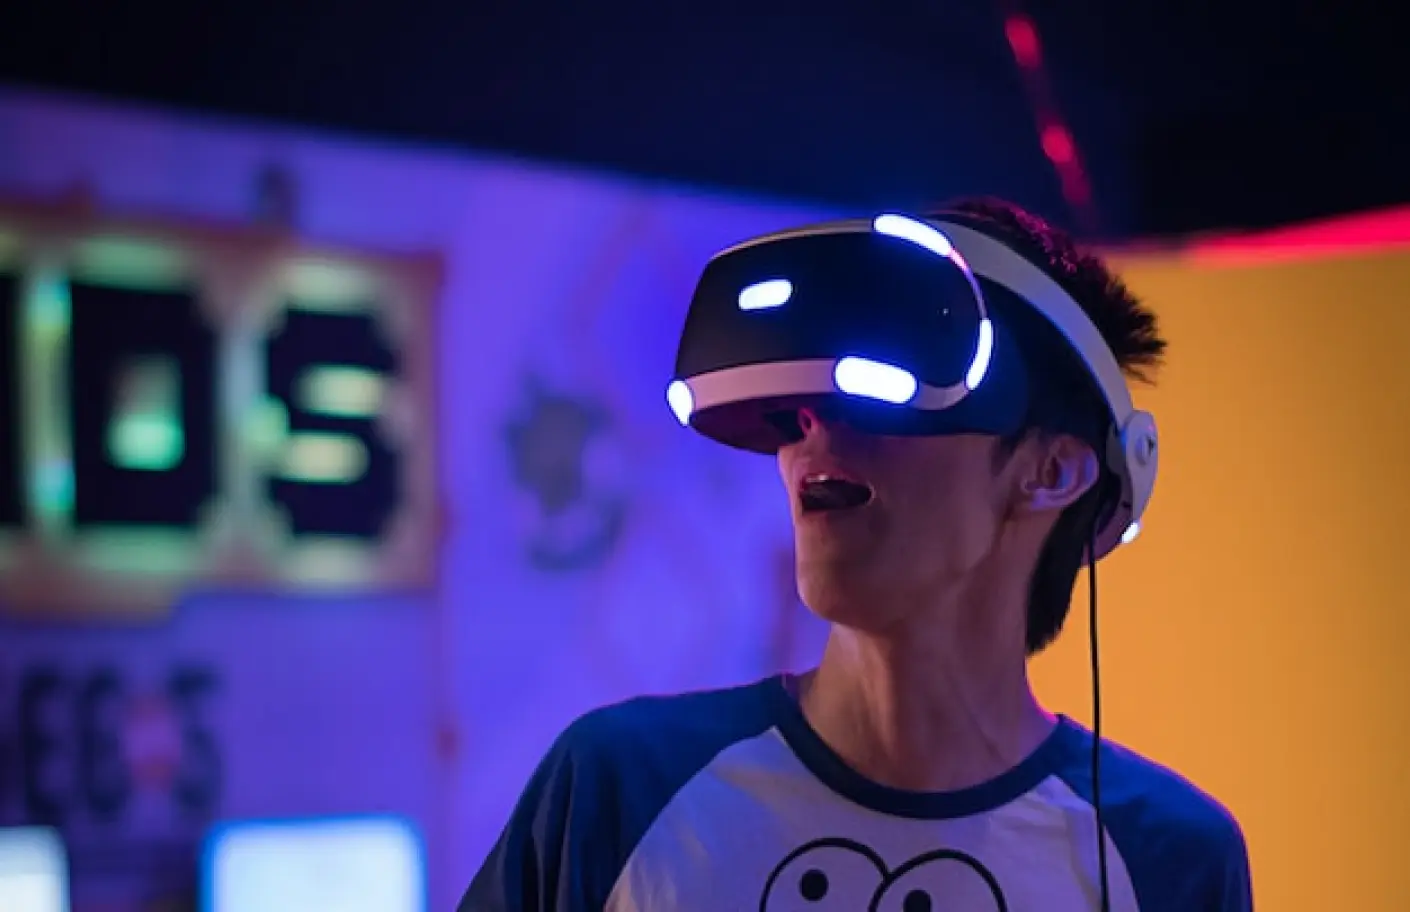 A person wearing virtual reality goggles in a room of neo lights implies the latest technologies